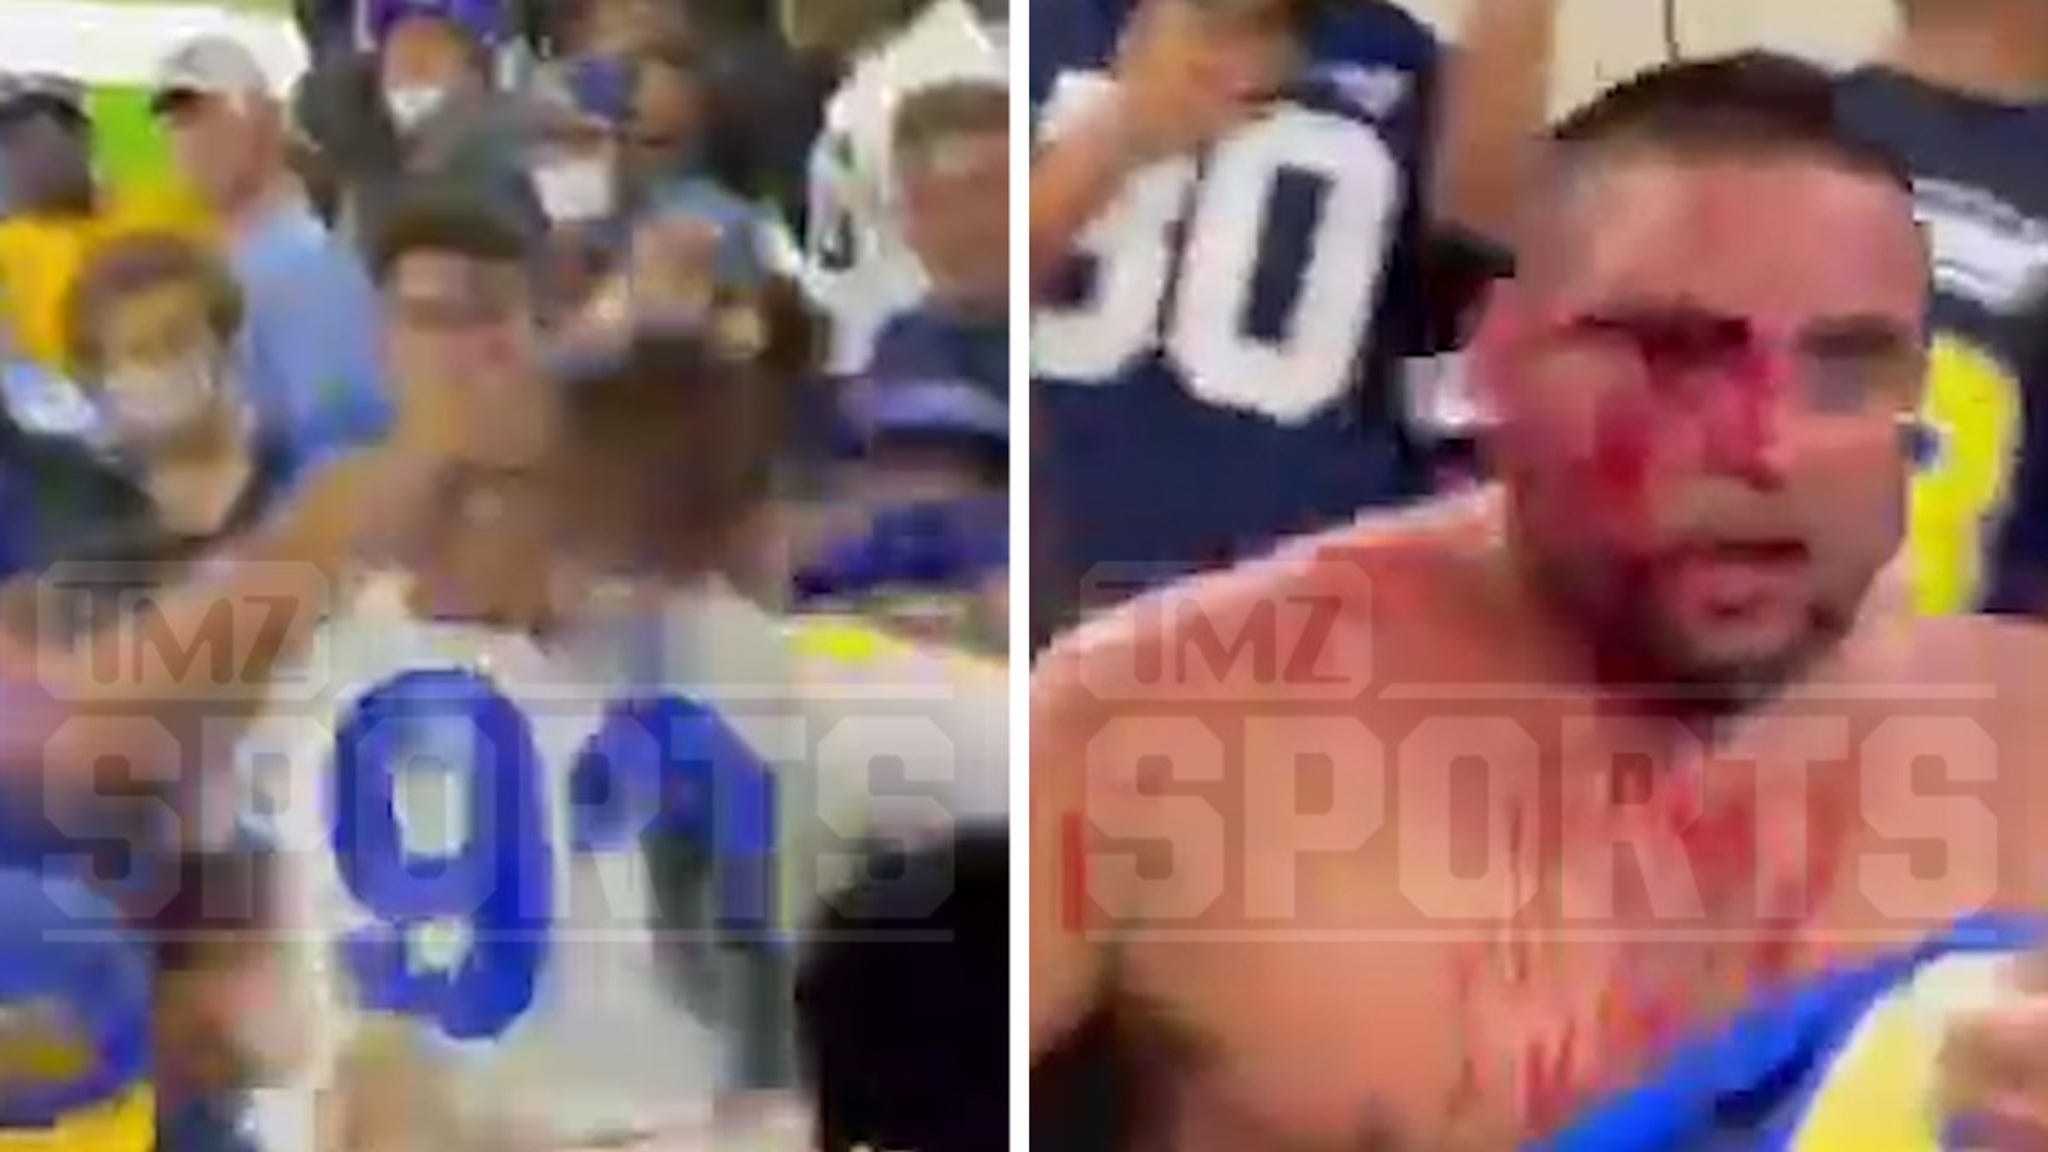 Rams Vs Chargers Game Erupts Into Insane Fan Fight California News Times [ 675 x 1200 Pixel ]